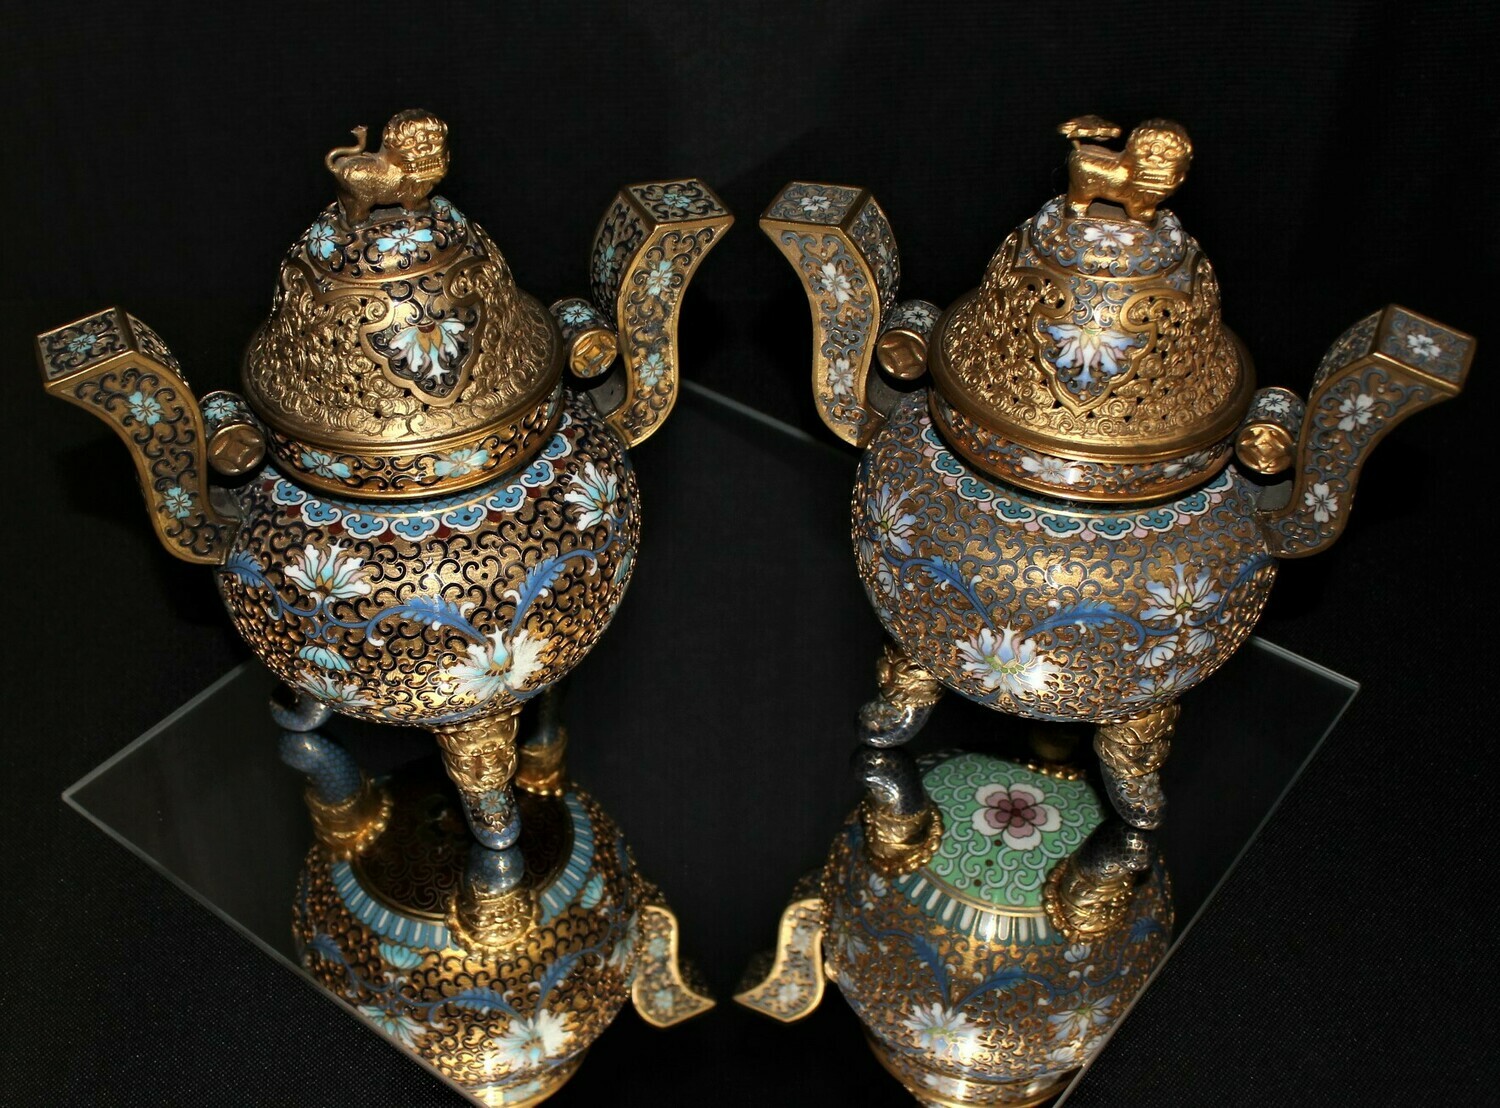 Pair of Chinese Cloisonné 3-Legged Foo Dog Censer Incense Burners w/Lion Covers